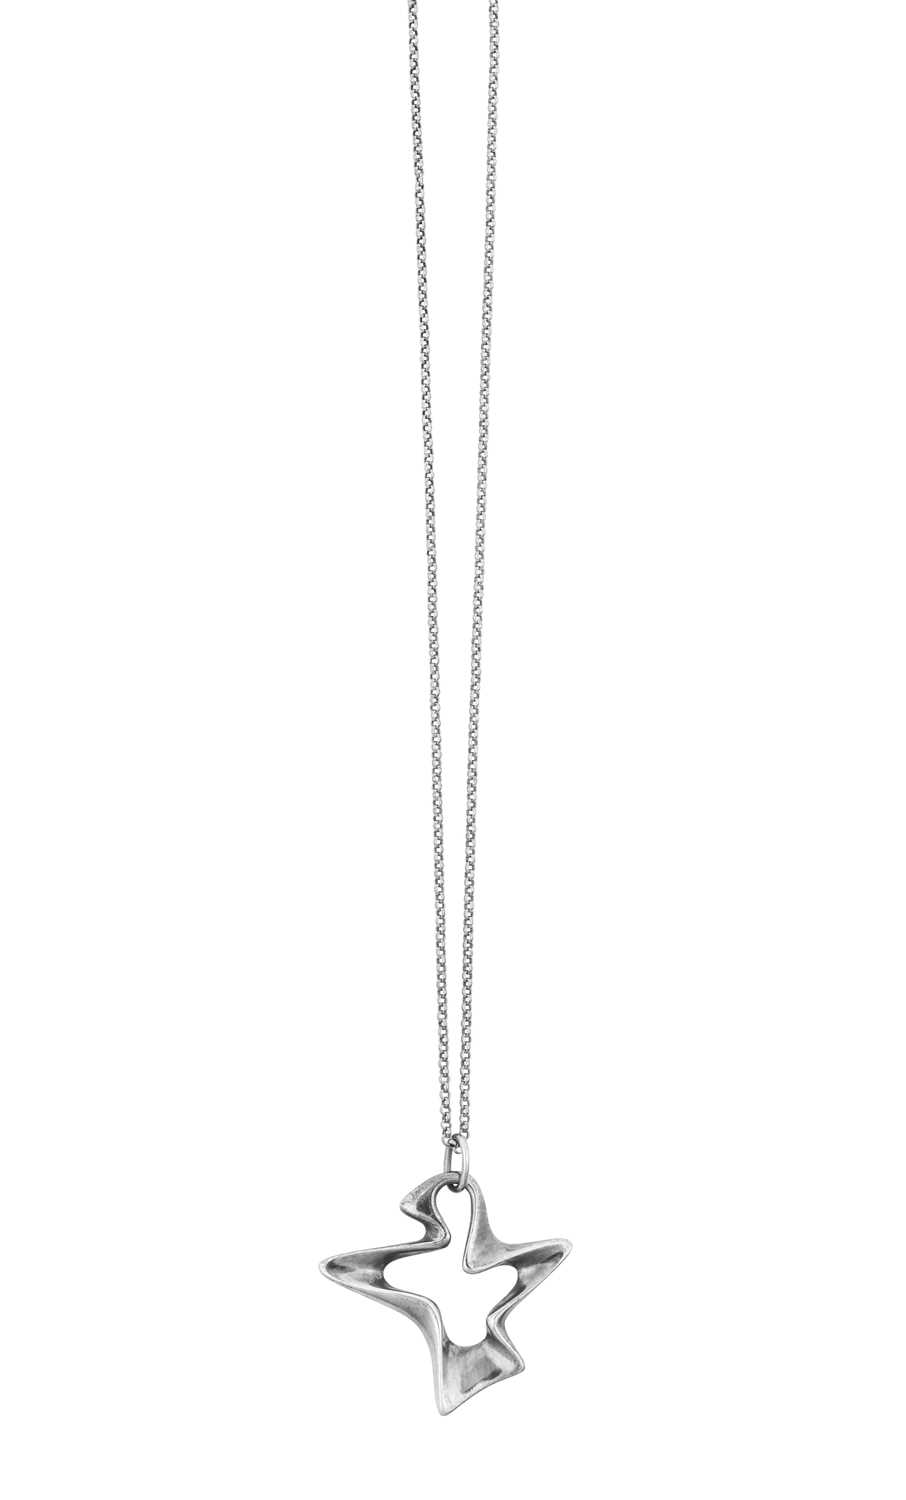 A Pendant on Chain, designed by Henning Koppel for Georg Jensen the white plain polished openwork